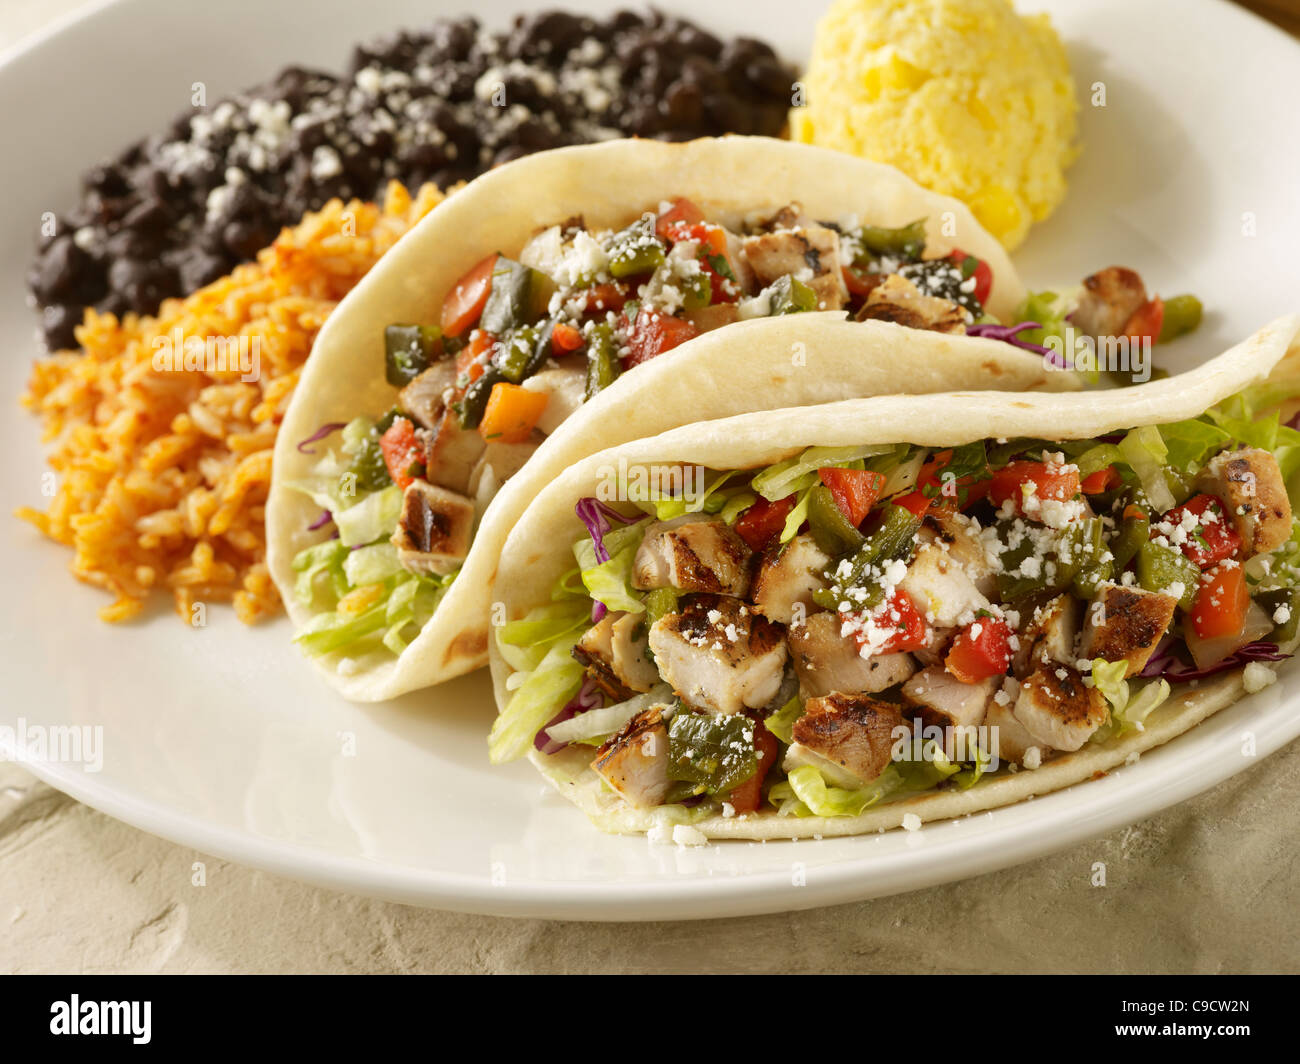 Grilled chicken tacos Stock Photo